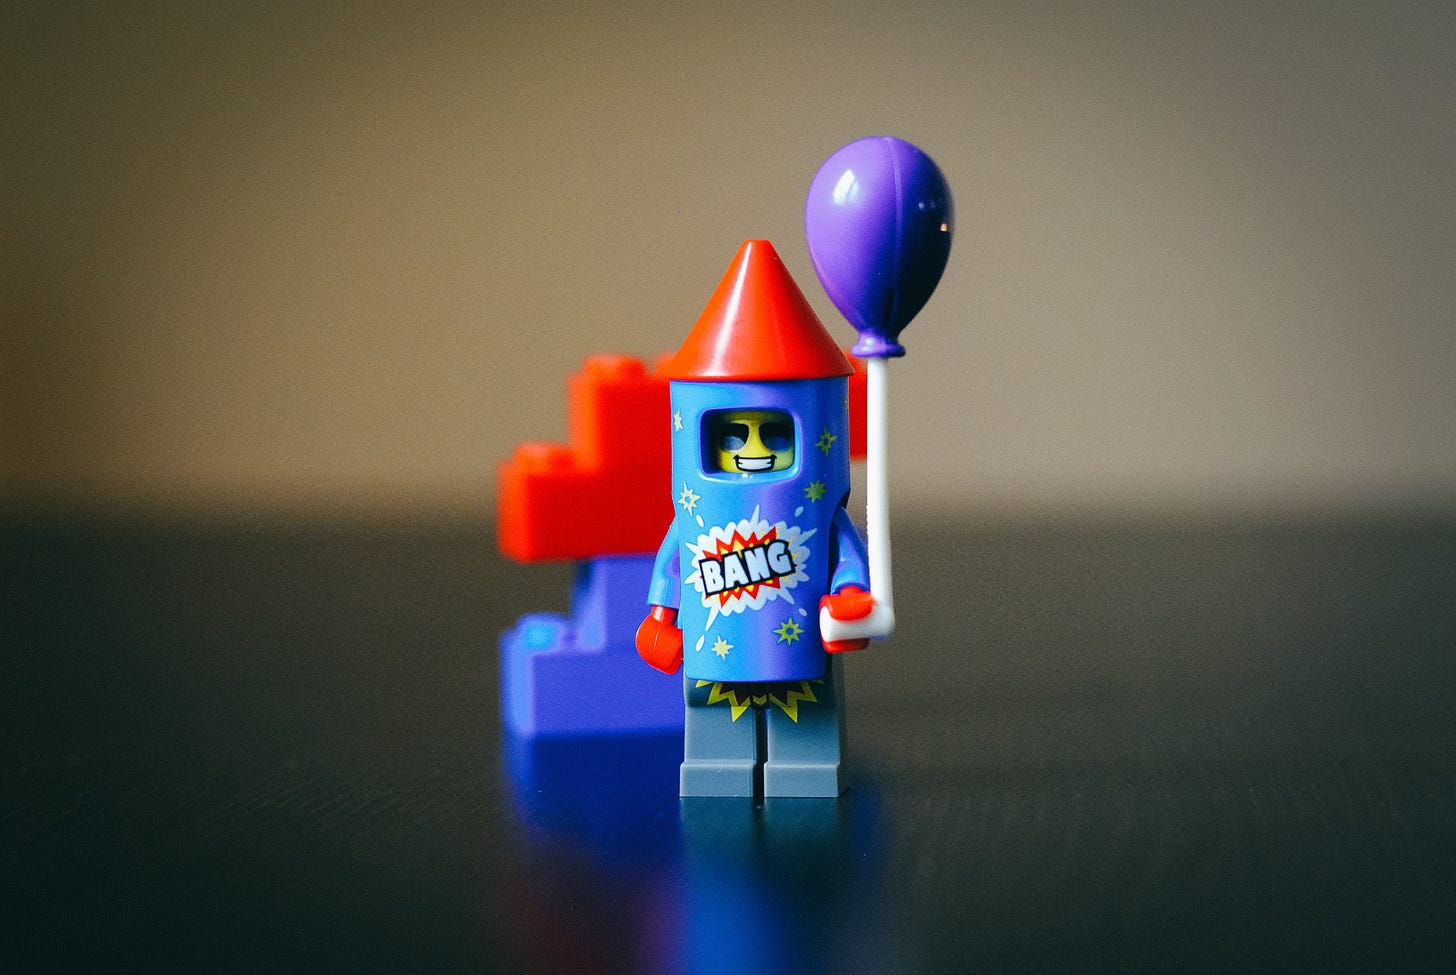 Lego person dressed as firecracker